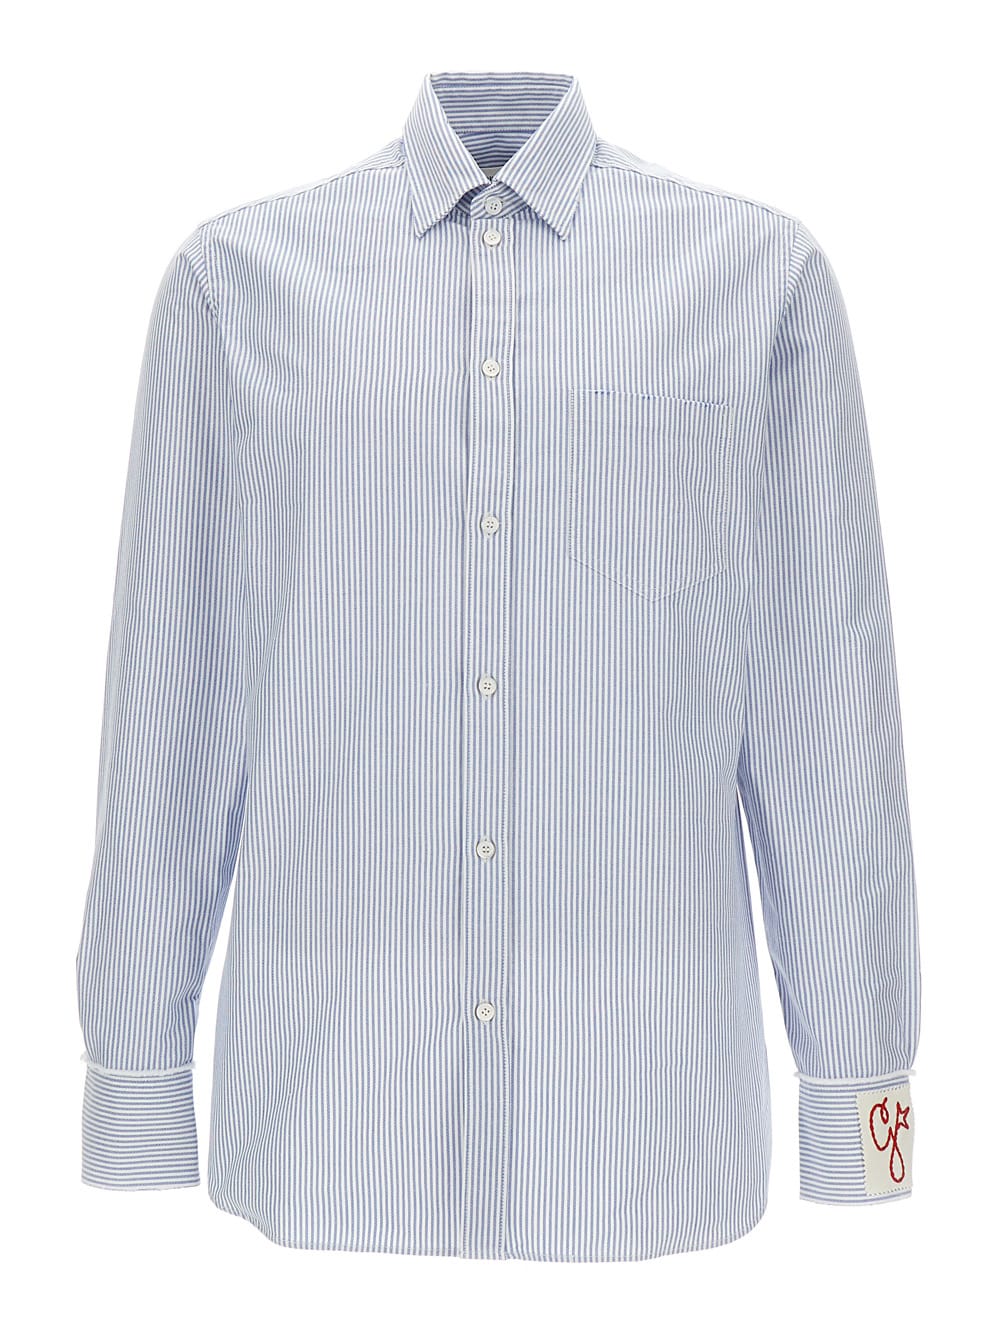 GOLDEN GOOSE WHITE AND LIGHT BLUE SHIRT WITH STRIPE MOTIF IN COTTON WOMAN